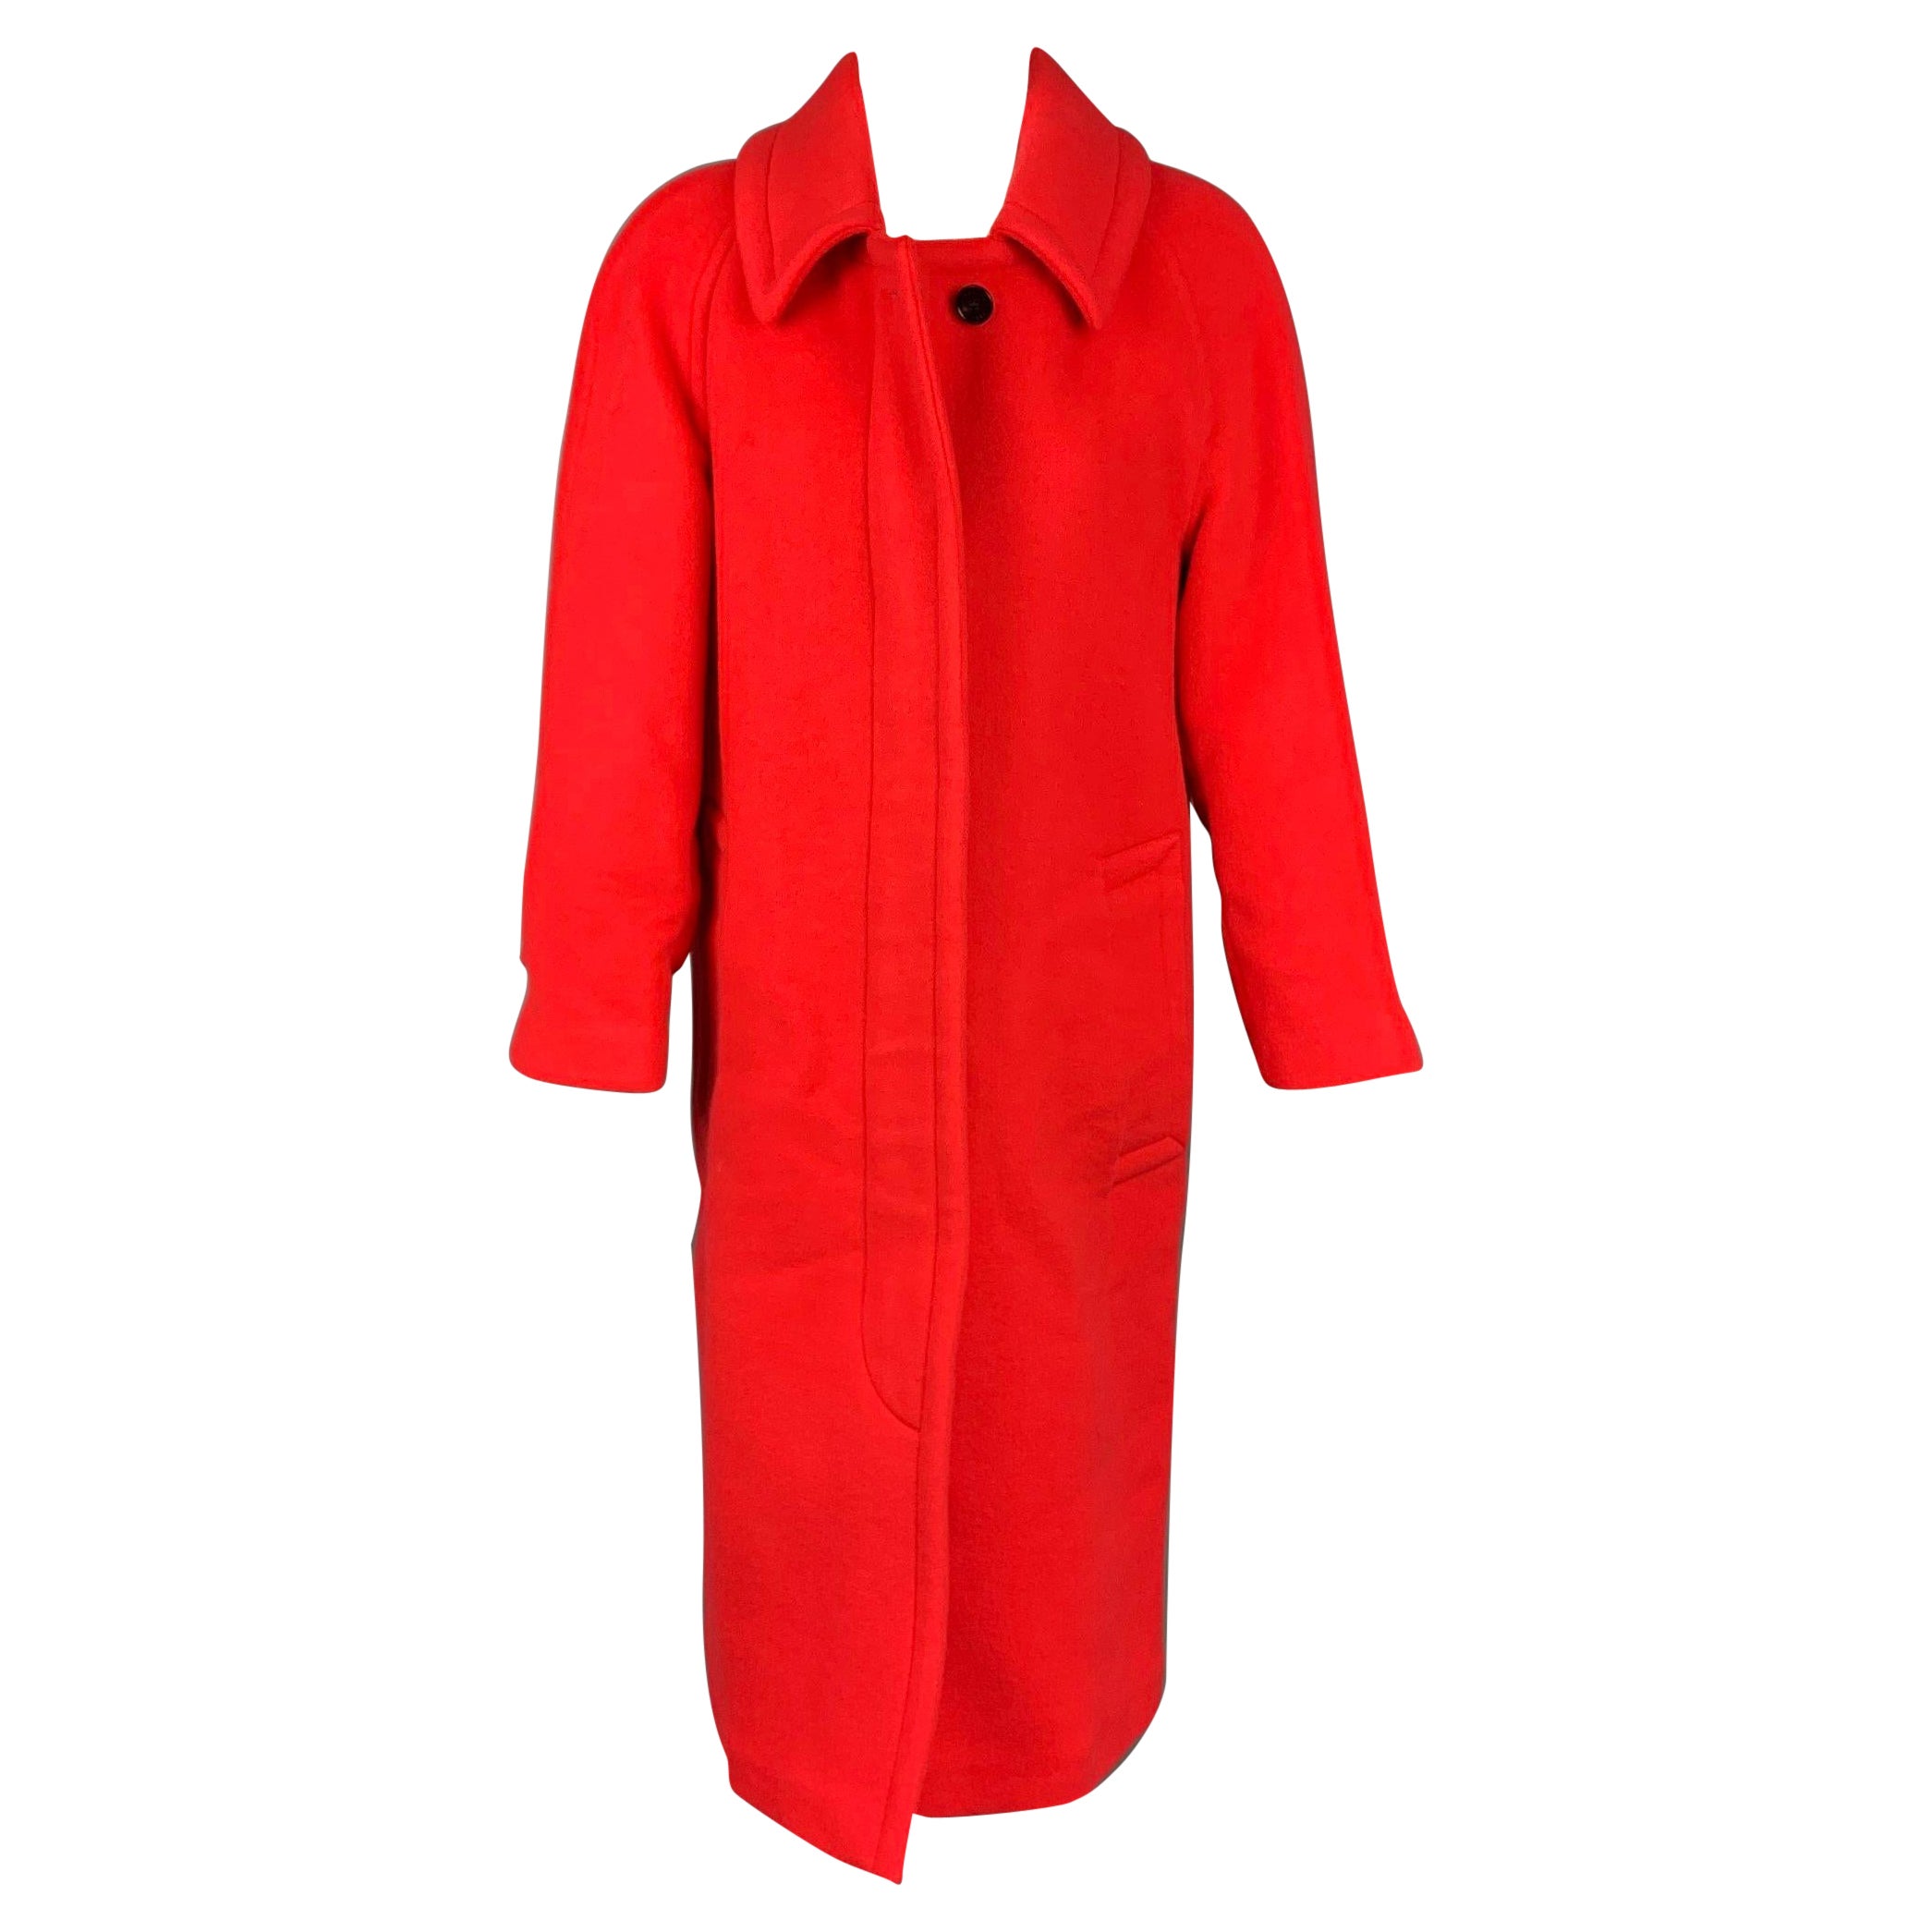 BURBERRY Size 0 Red Wool / Cashmere Hidden Placket Coat